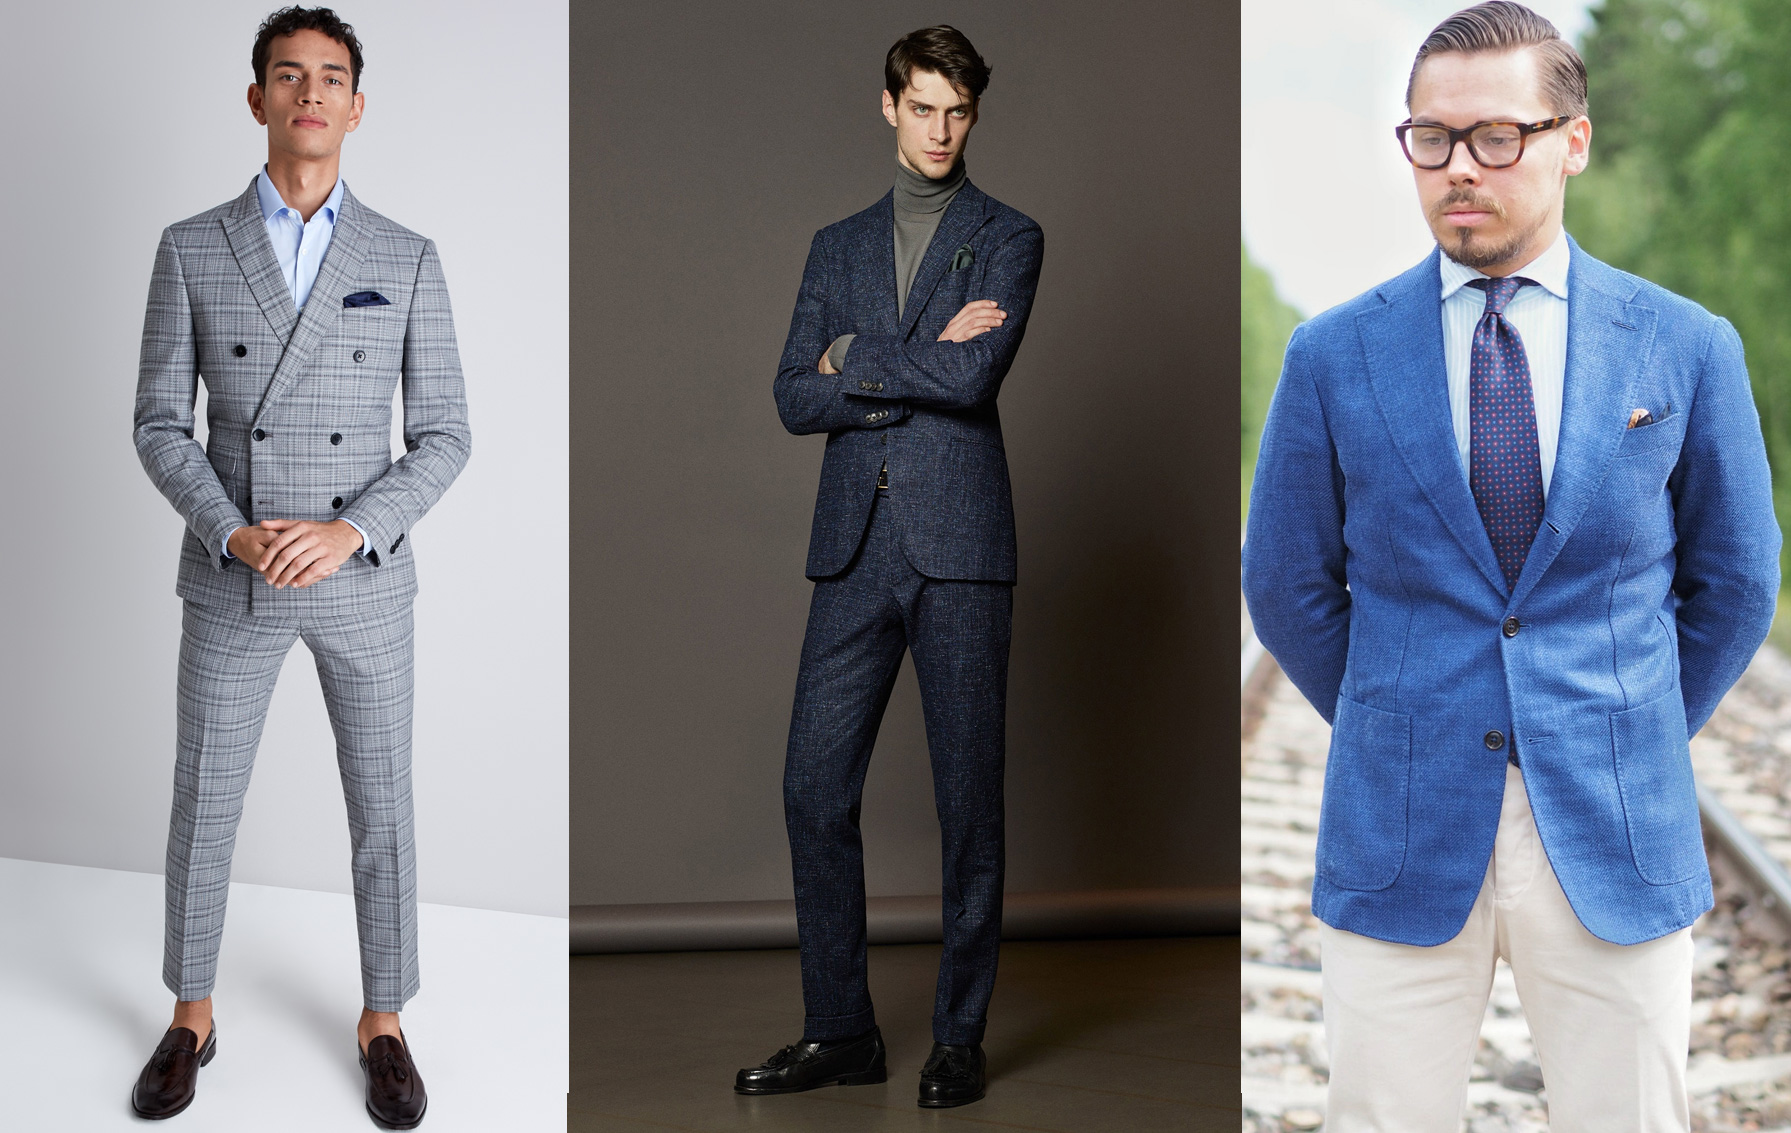 What To Wear To A Wedding - The Modern 